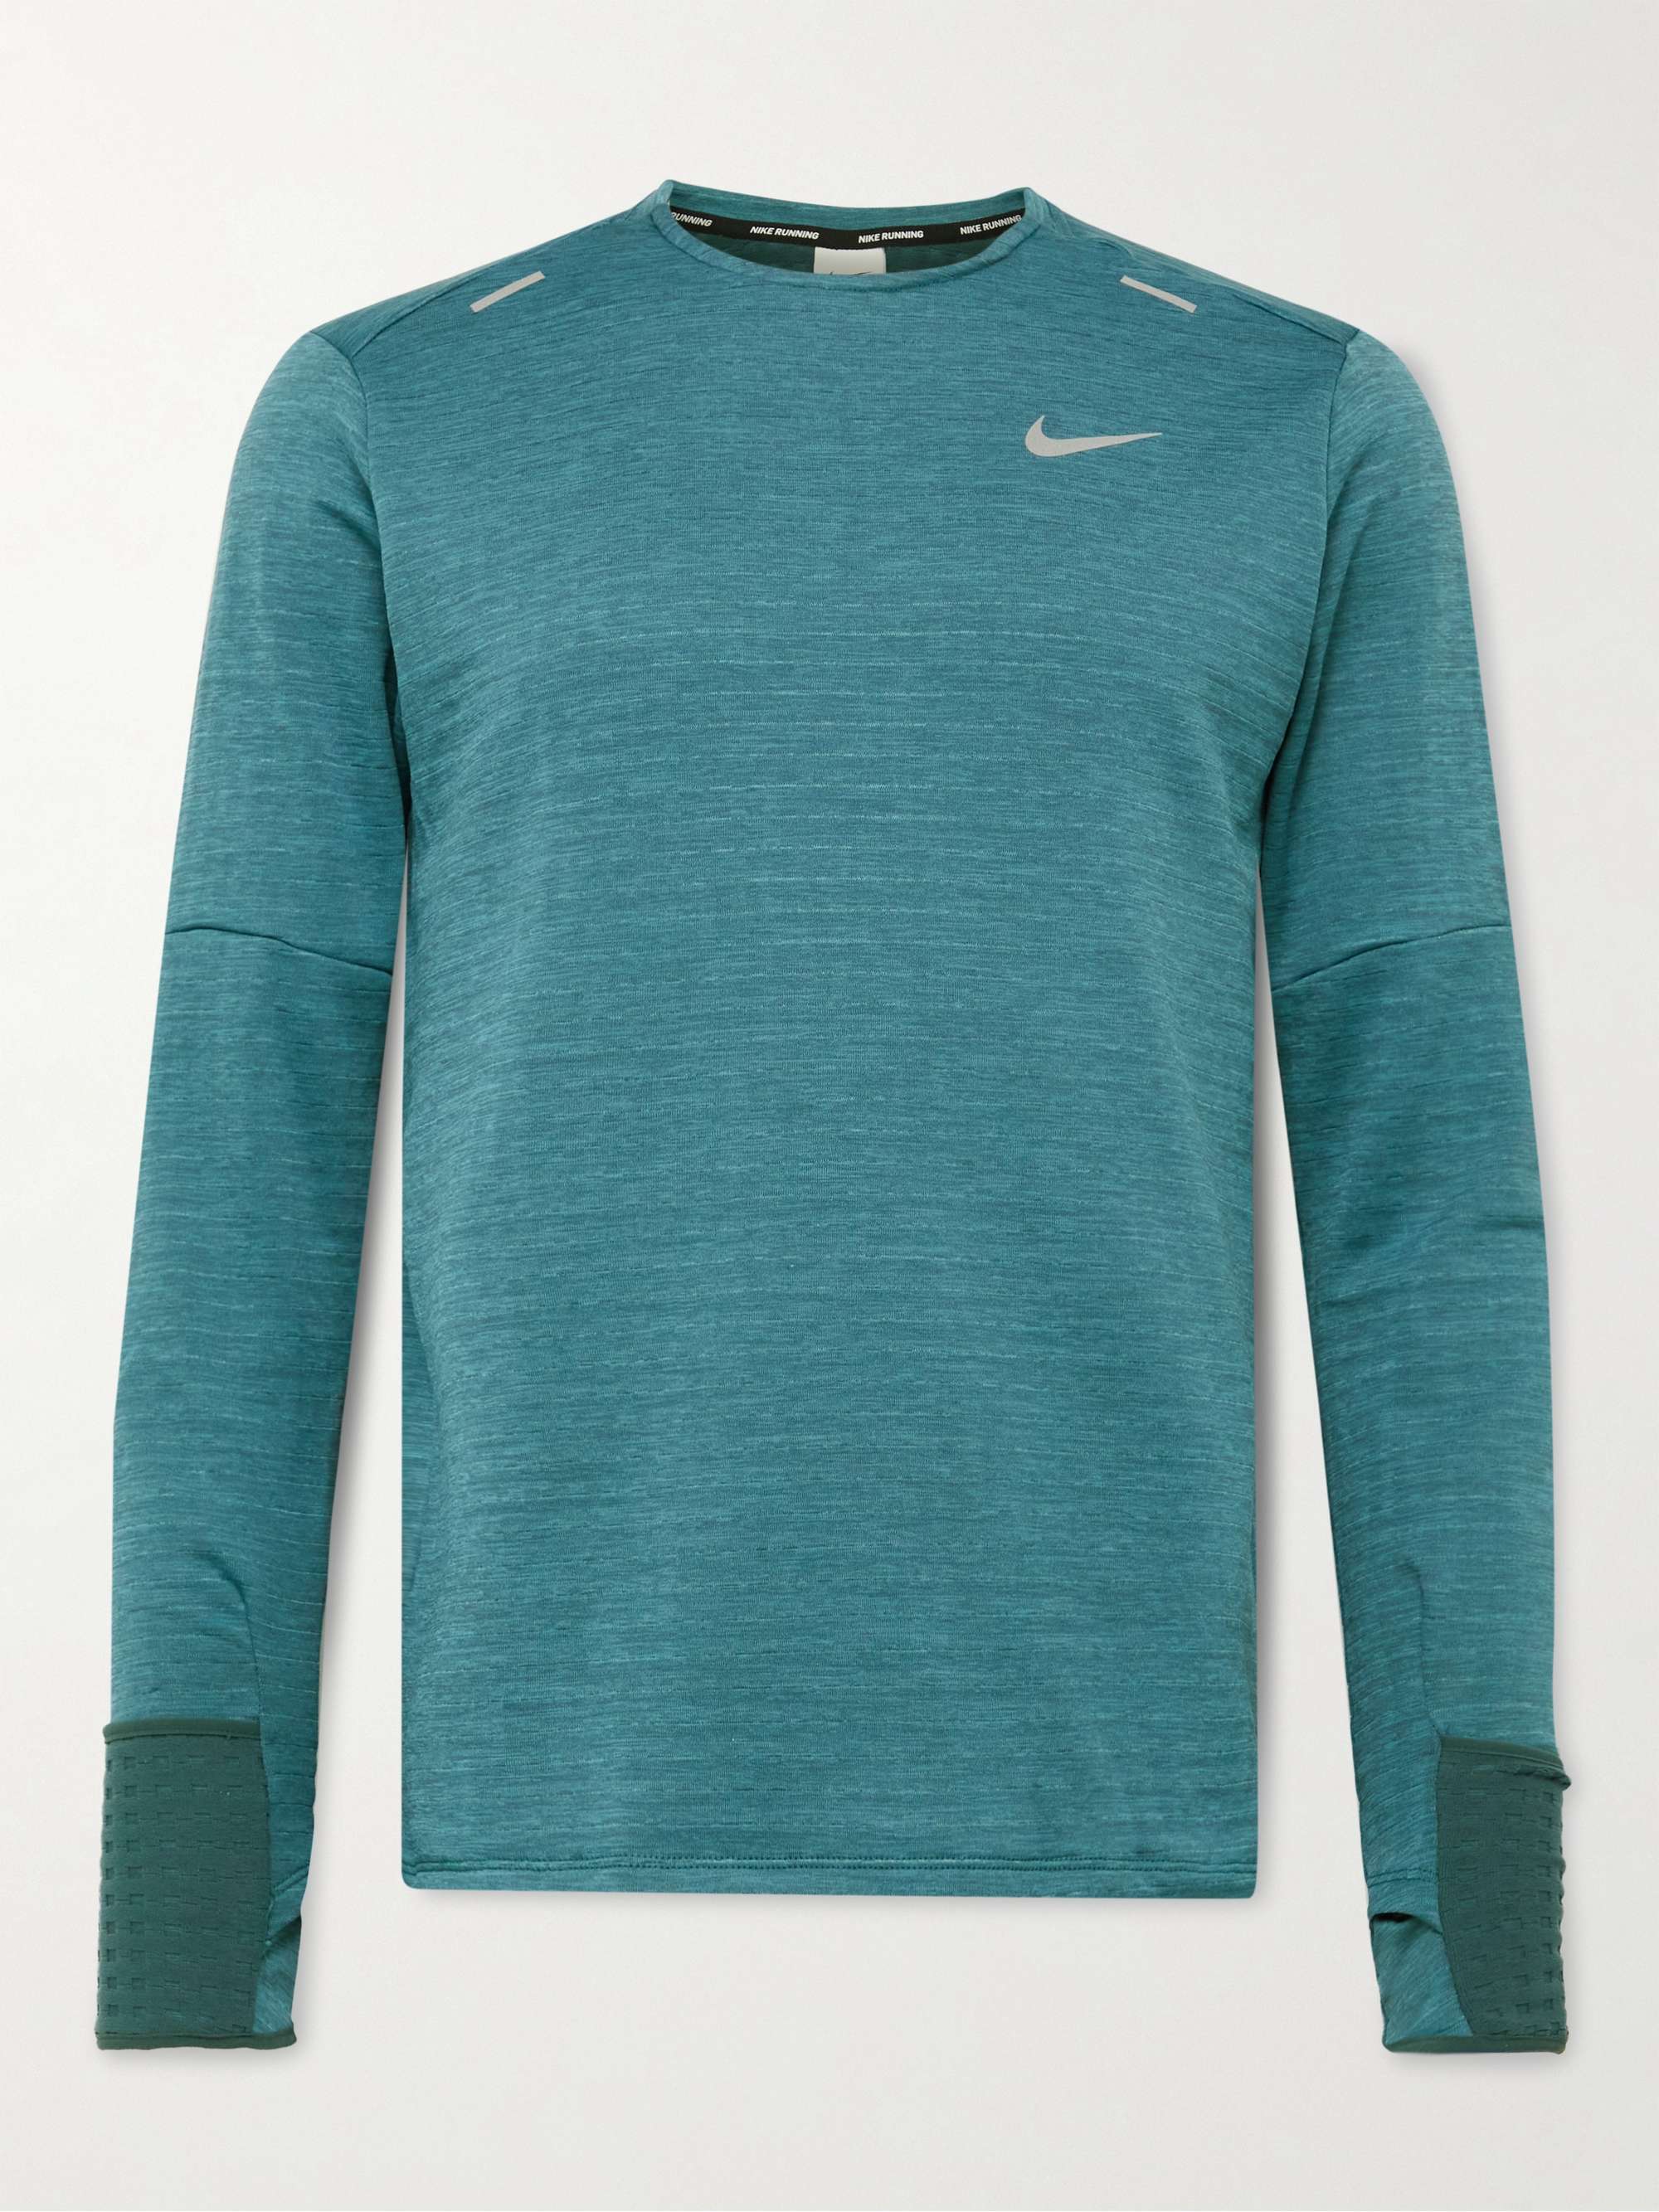 NIKE RUNNING Repel Element Therma-FIT Running Top | MR PORTER